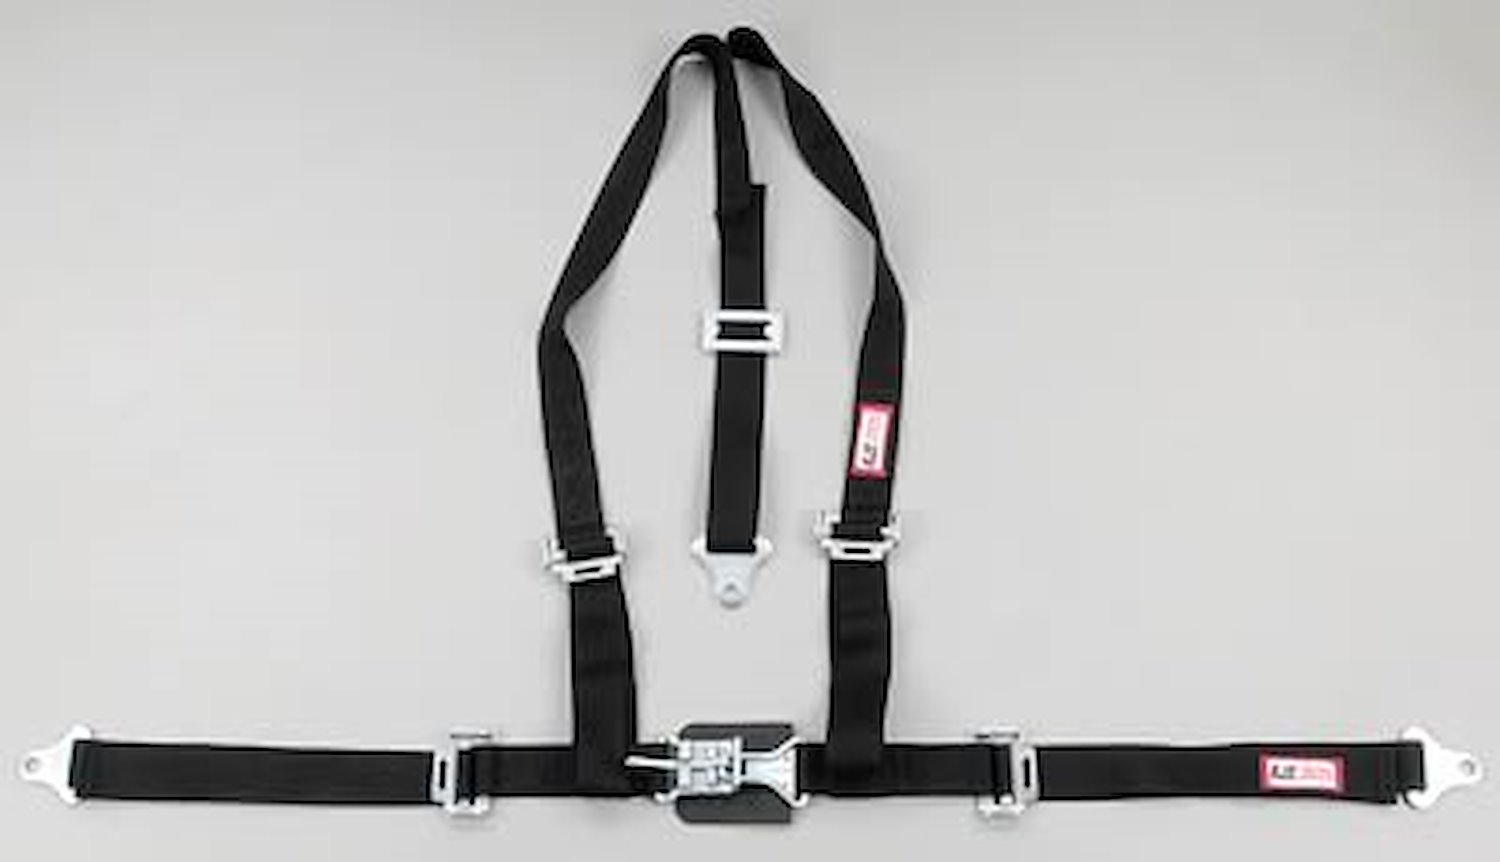 NON-SFI L&L HARNESS 3 PULL DOWN Lap BELT SNAP SEWN IN 2 S.H. Y FLOOR Mount w/STERNUM STRAP WRAP/BOLT GRAY